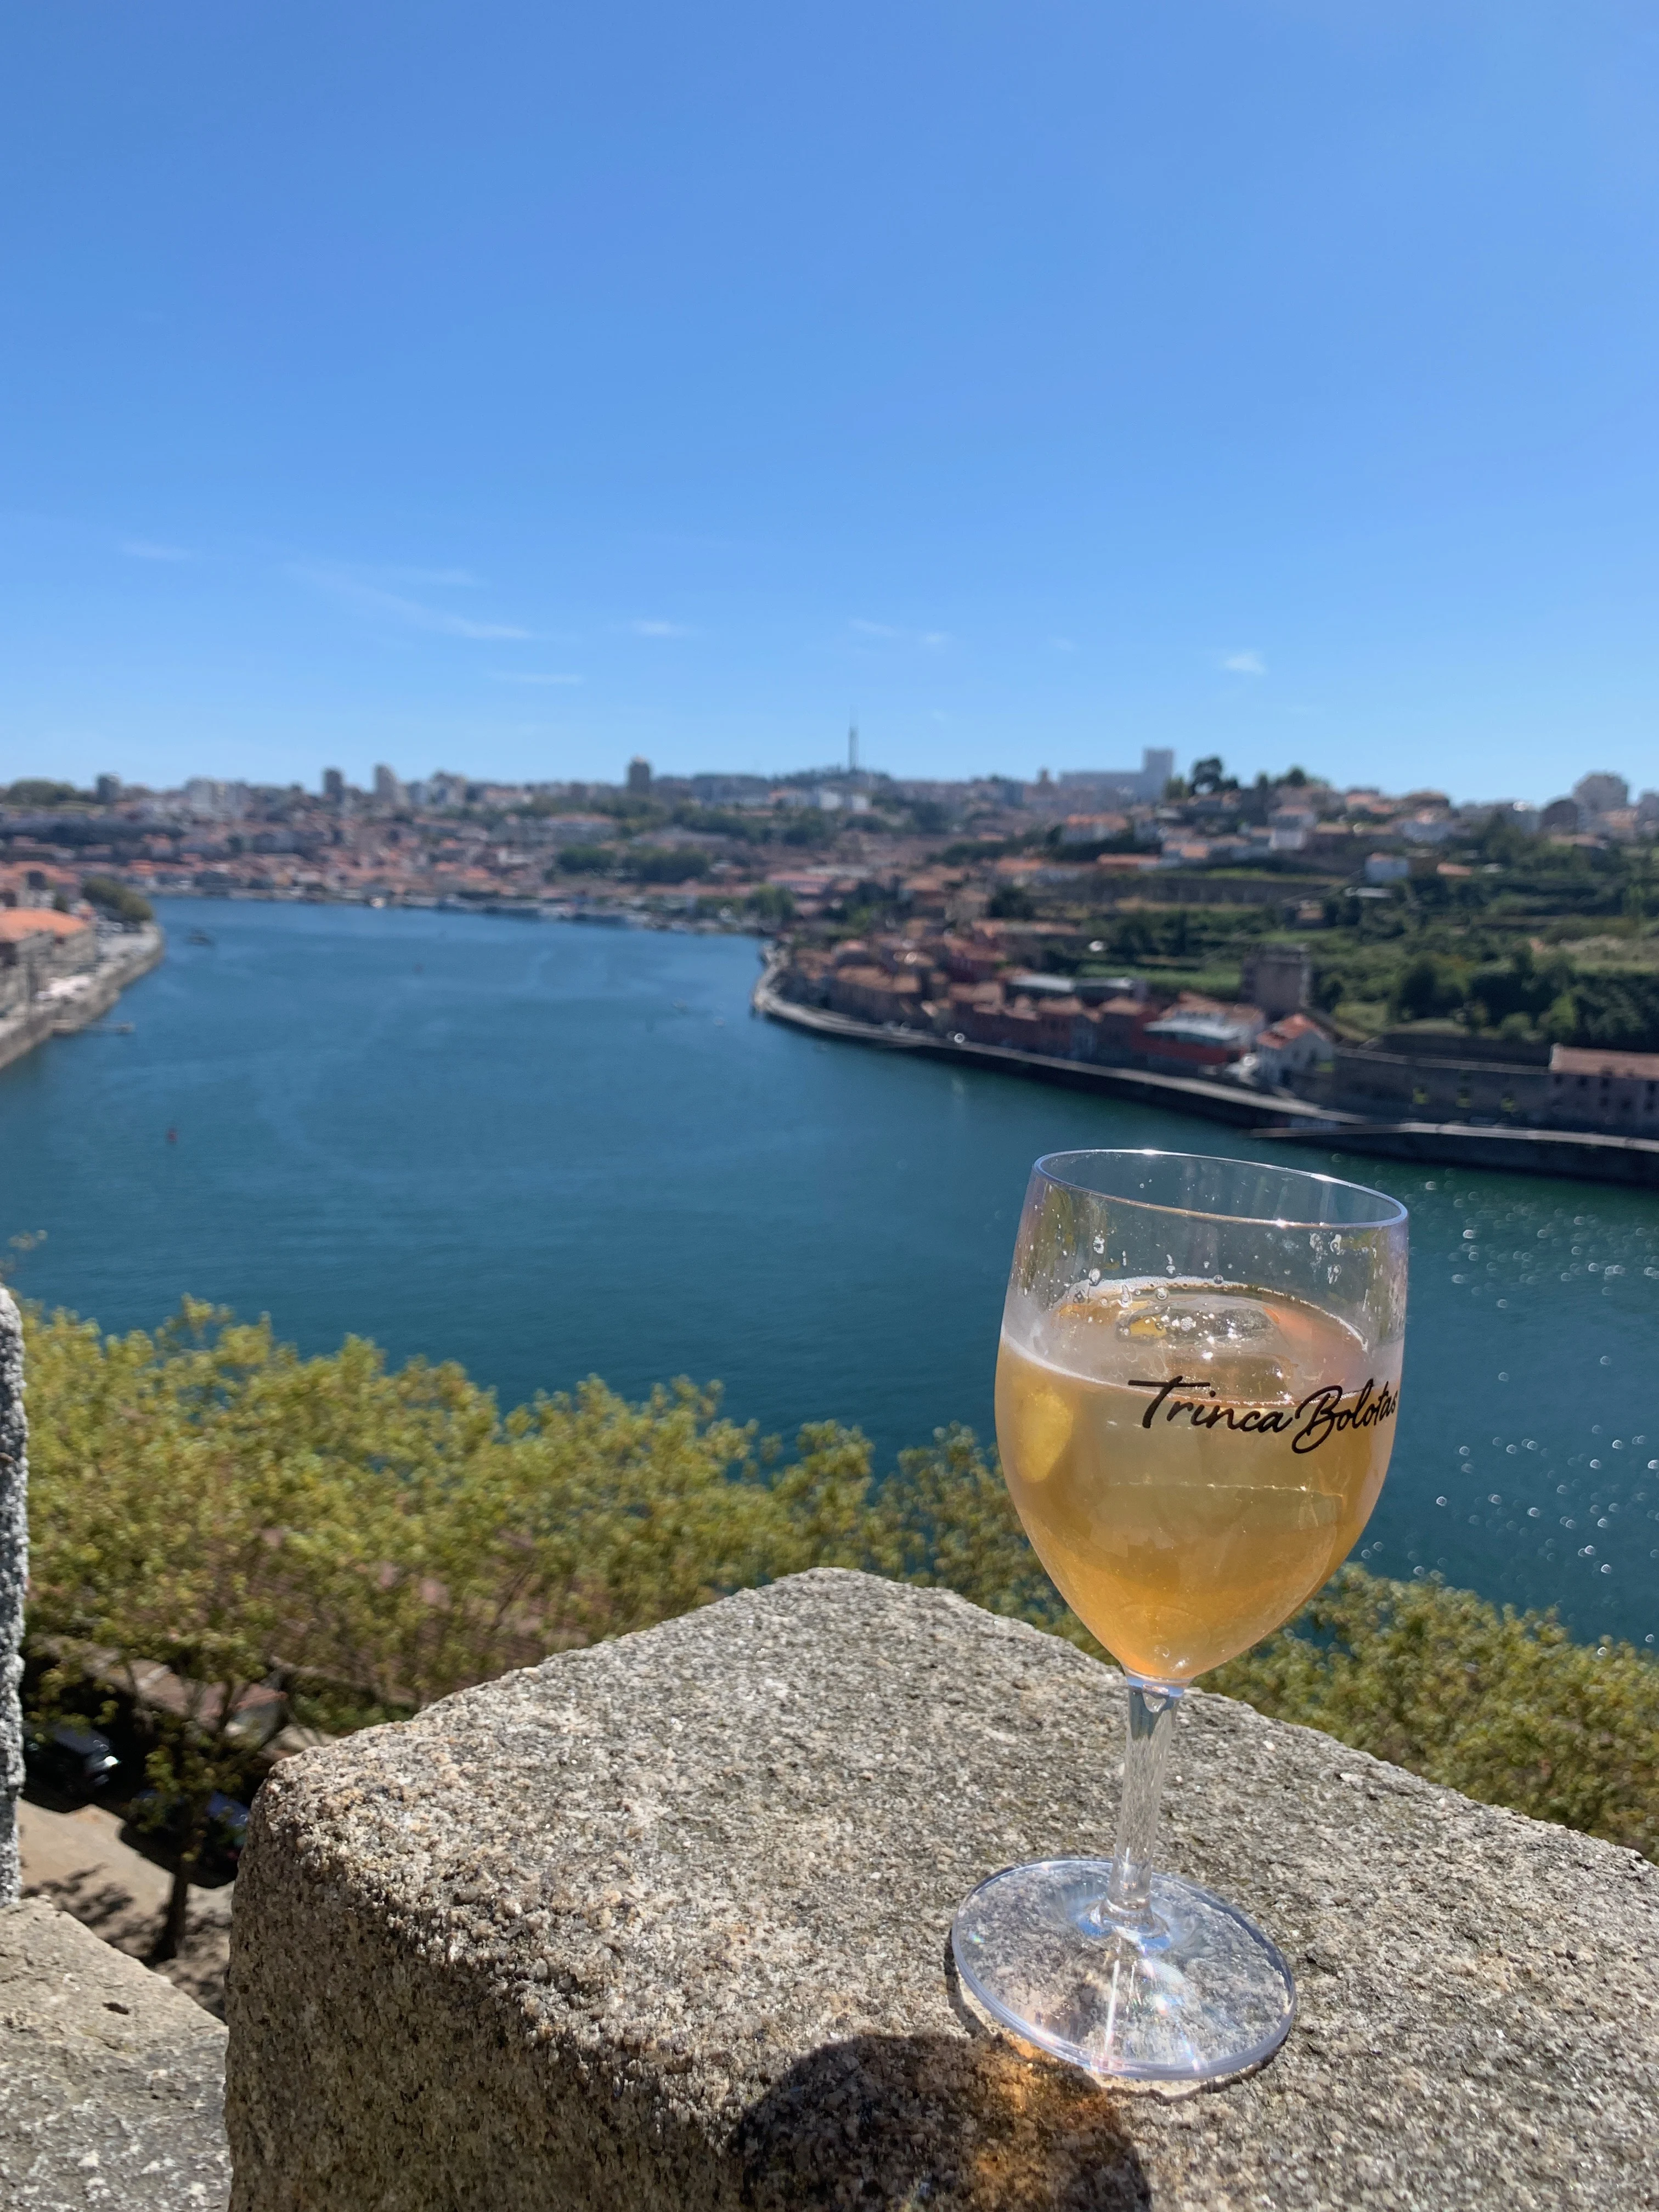 A Porto Tonico overlooking the Douro river at the Crystal Palace Gardens